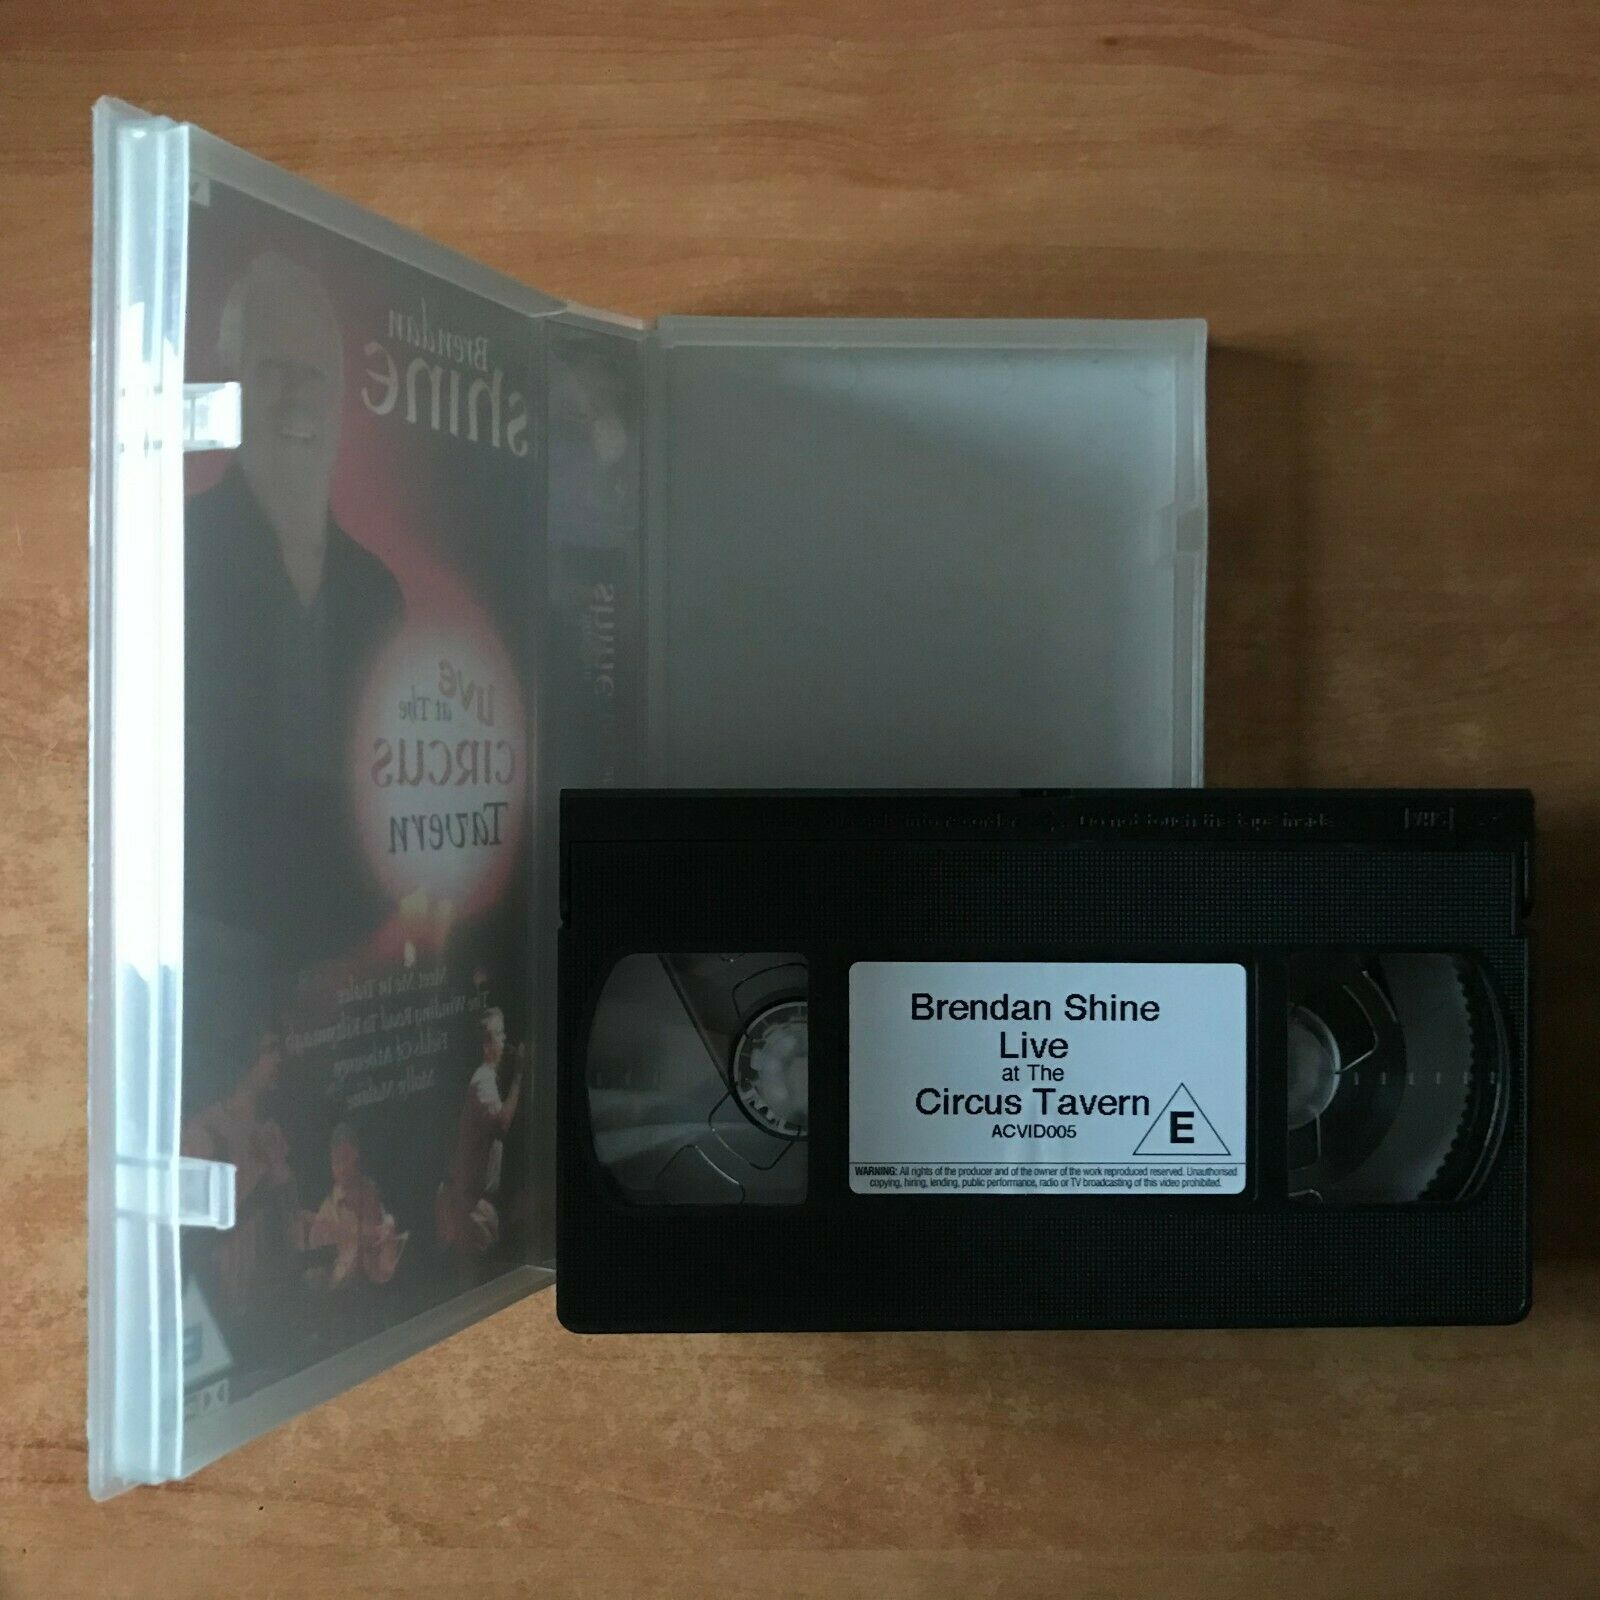 Brendan Shine: Live At The Circus Tavern - Concert - 'Cotswolds' - Music - VHS-